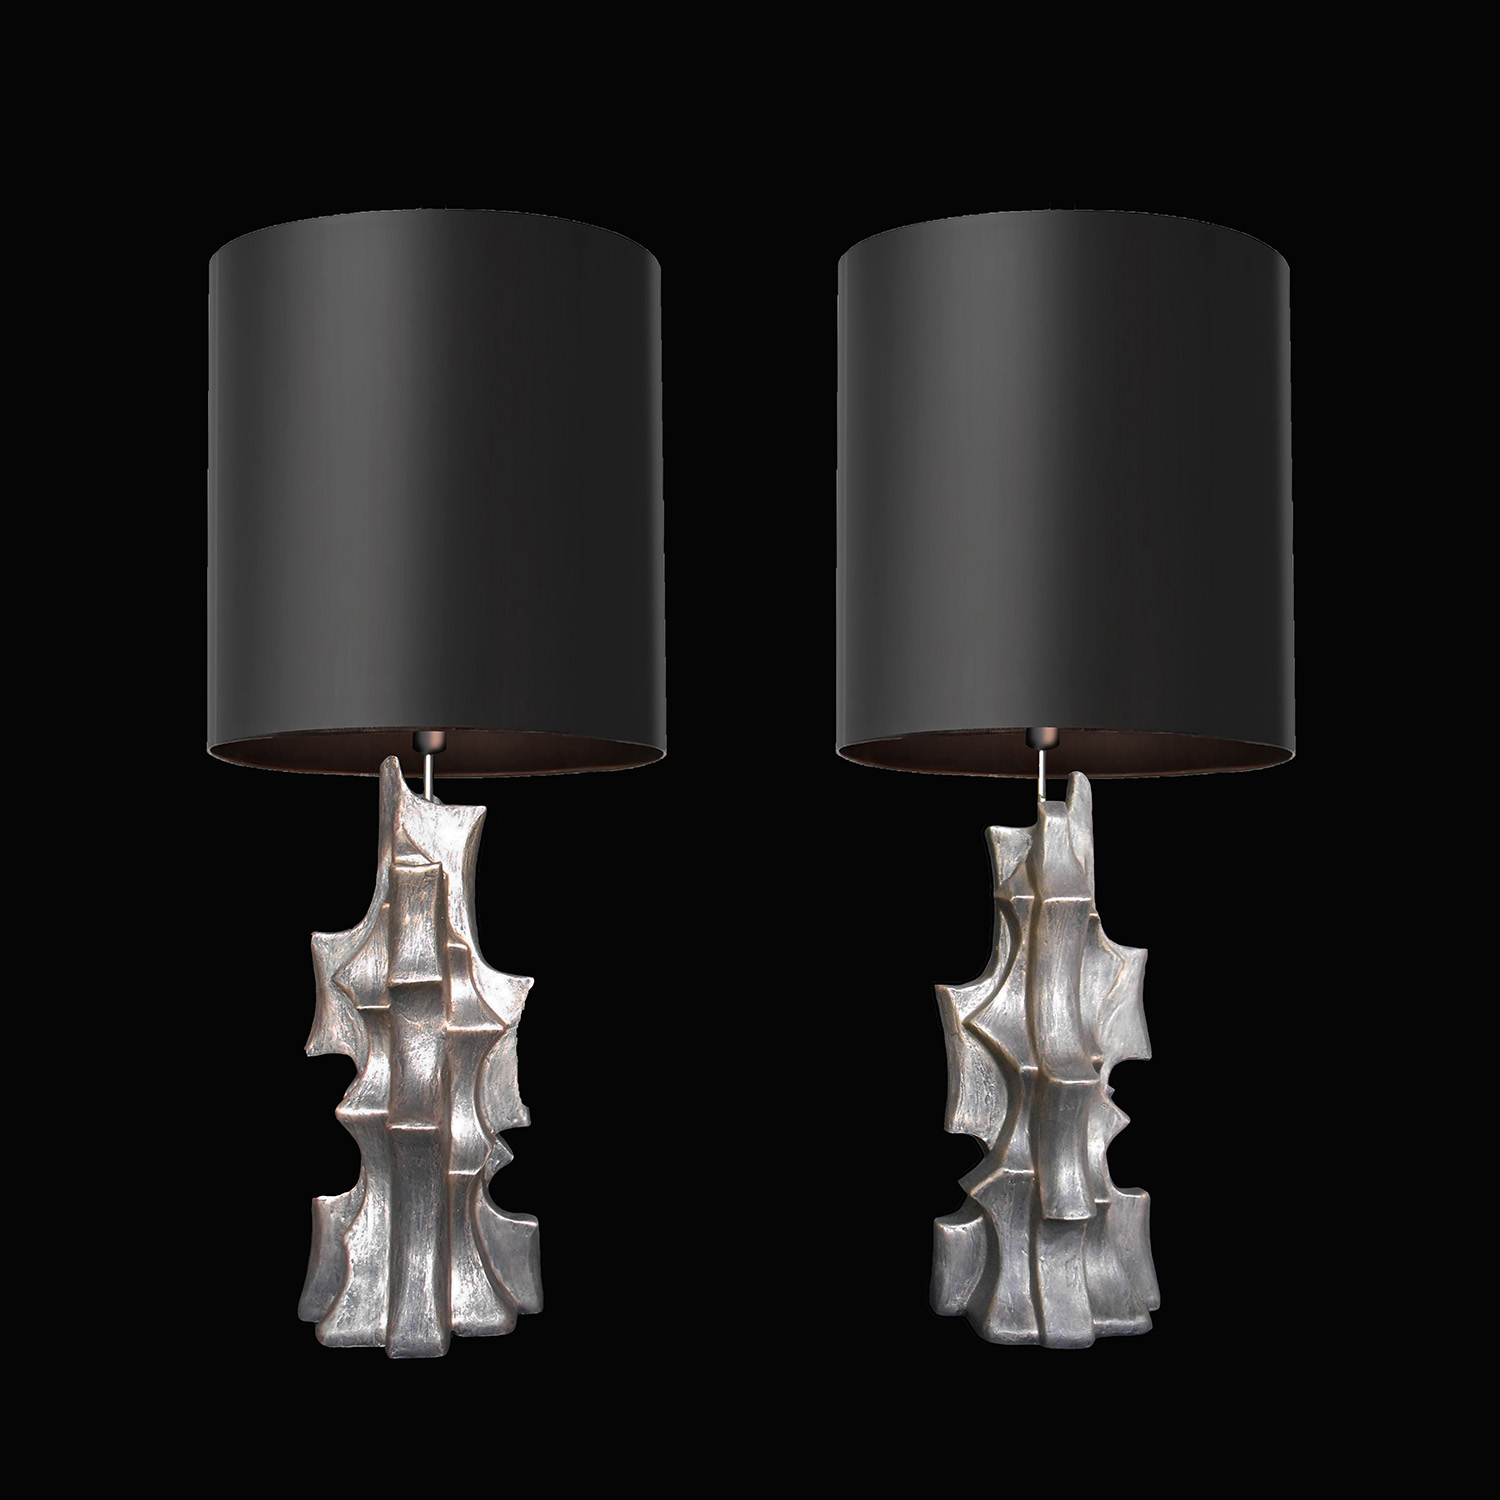 ORGANIC TABLE LAMPS, 21" tall, 2018